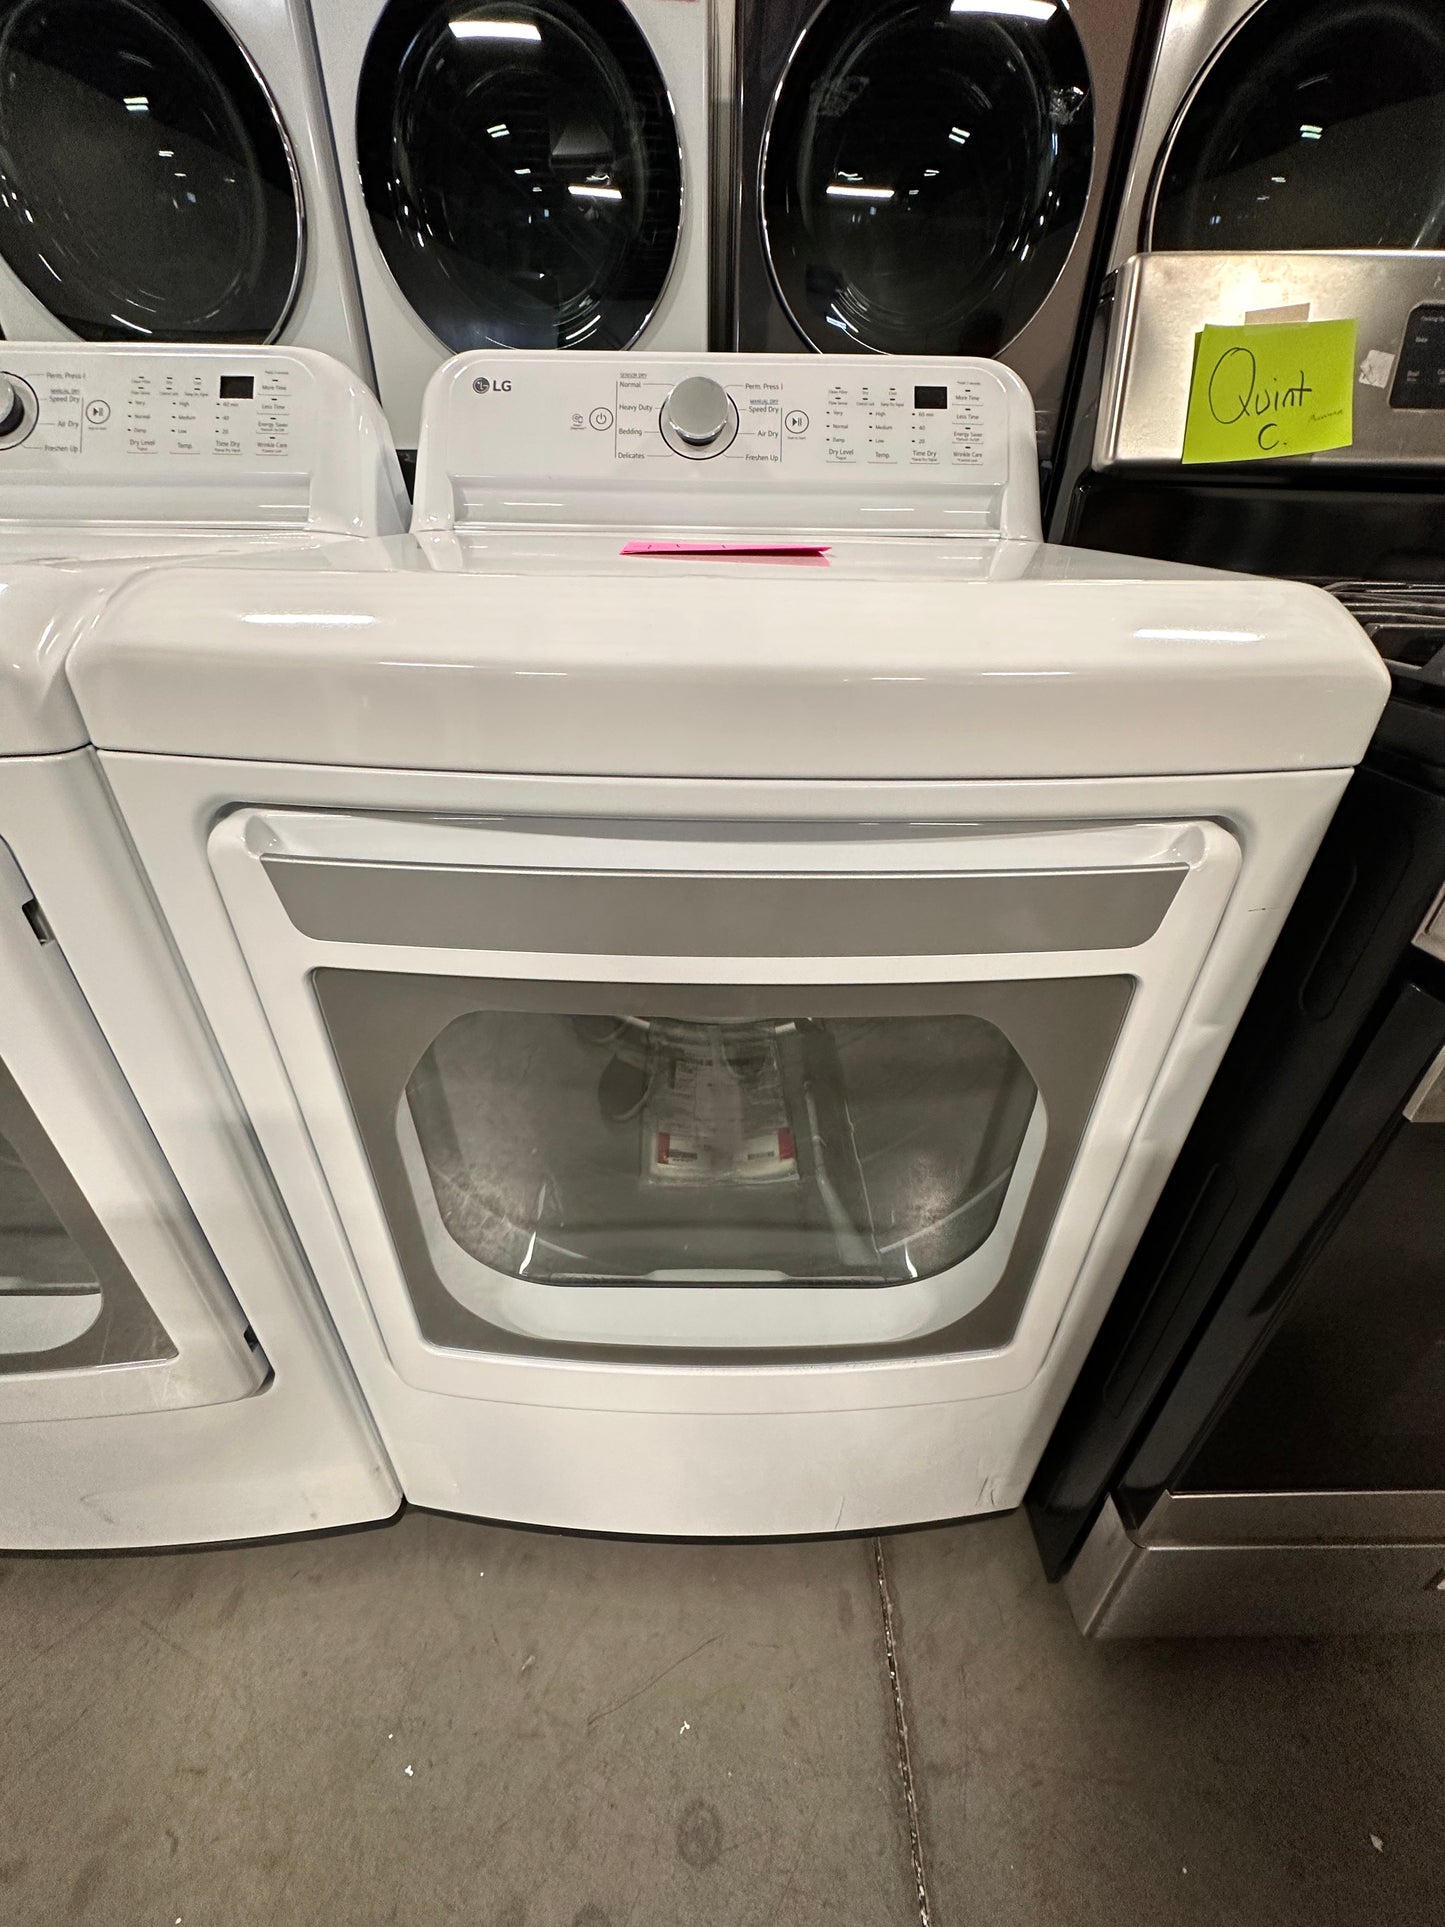 GREAT NEW LG LARGE CAPACITY ELECTRIC DRYER - DRY12067